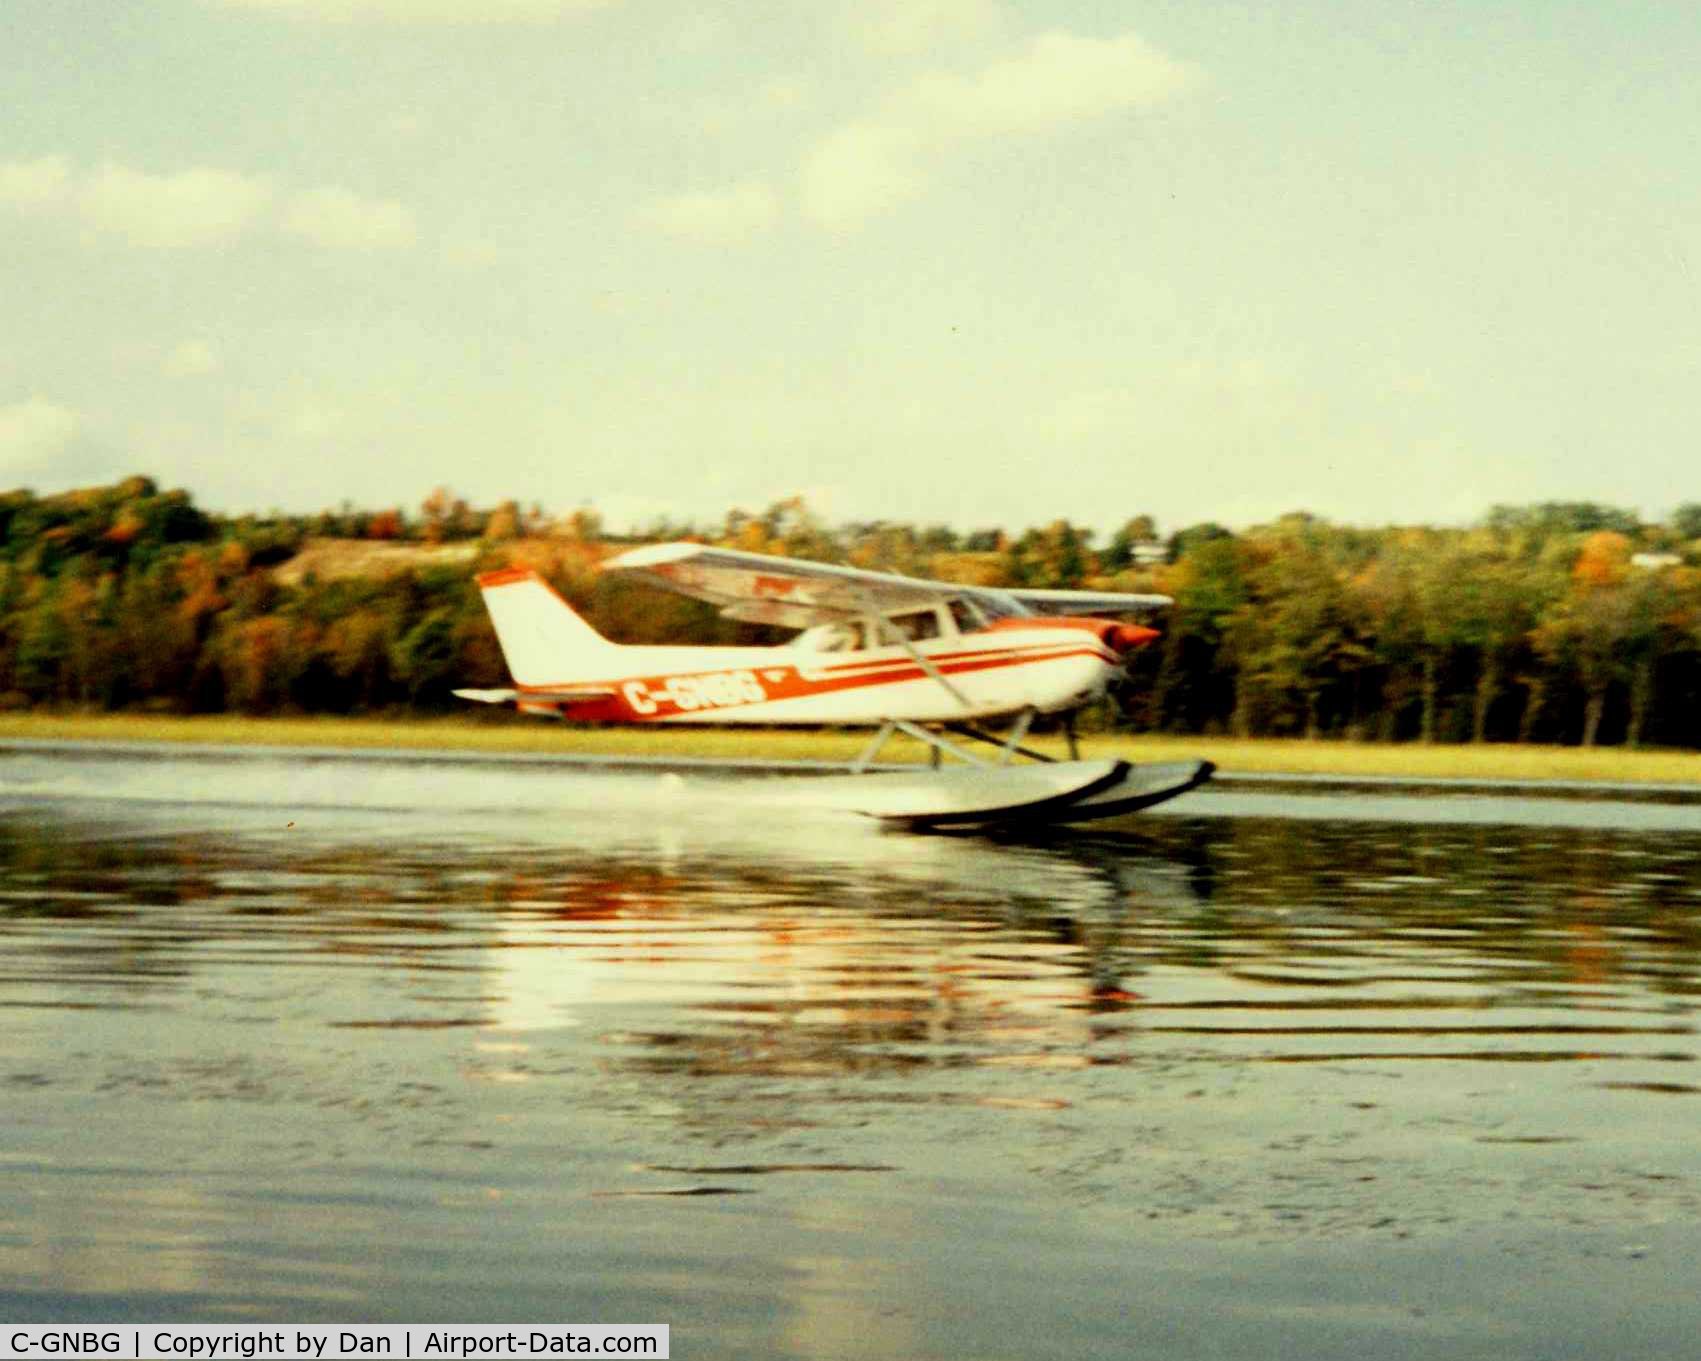 C-GNBG, 1975 Cessna 172M C/N 17264201, Getting my Float rating 1995, Little Lake @ Barrie Landing with my instructor taking picture from canoe. Very proud of this thanks Dan